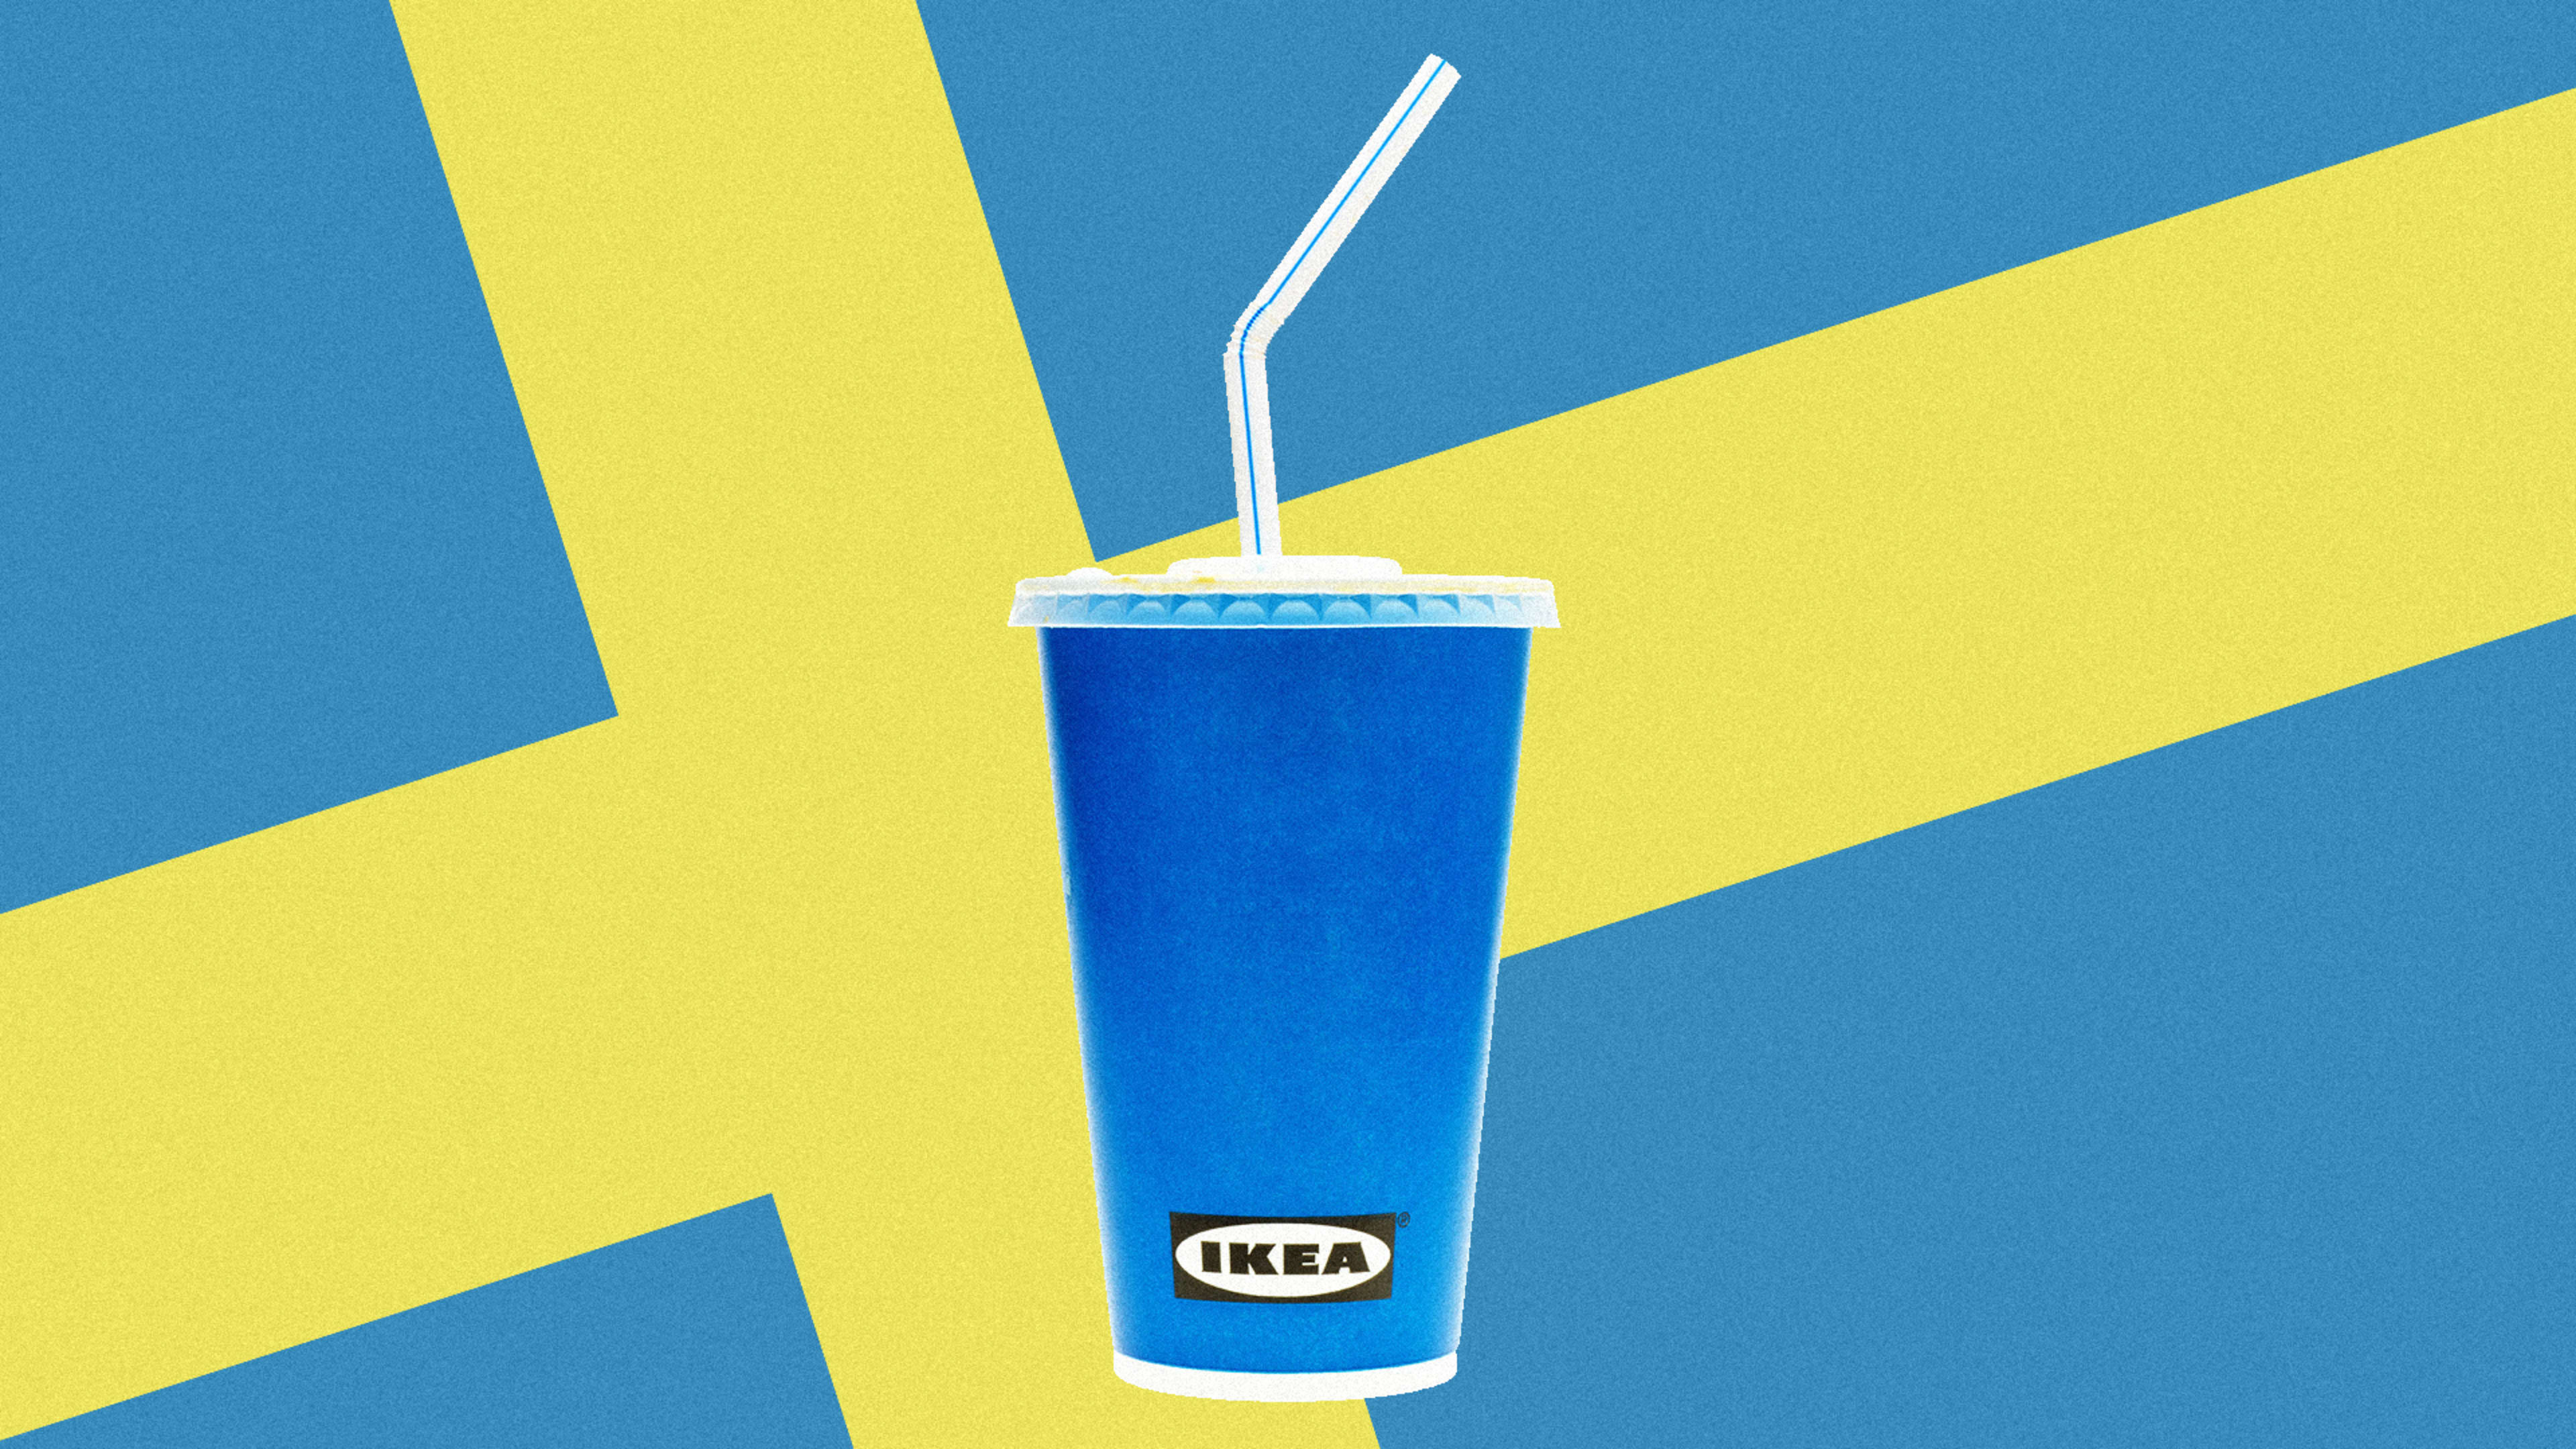 Ikea is ditching single-use plastic by 2020